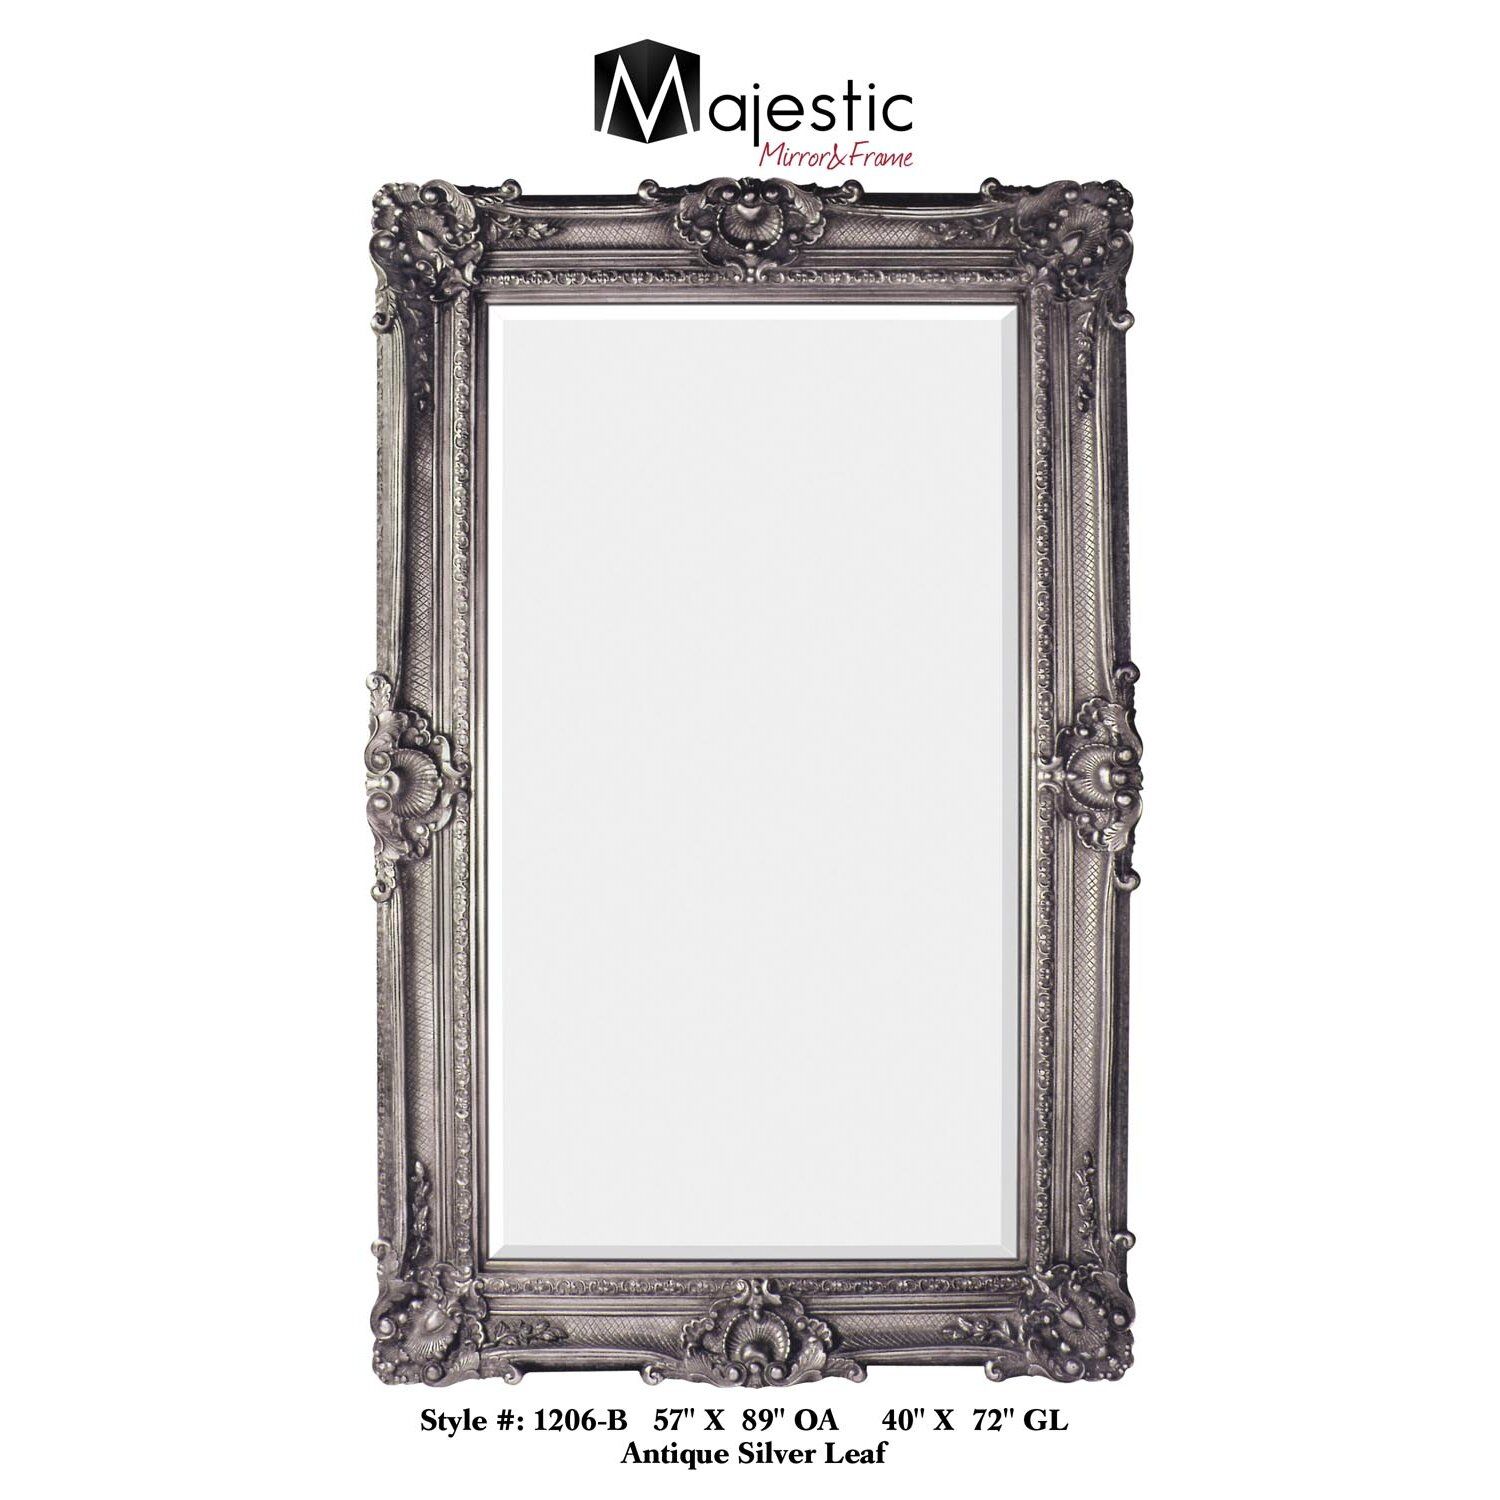 Majestic Mirror Antique Silver Leaf Finish Traditional Framed Beveled Within Metallic Gold Leaf Wall Mirrors (View 14 of 15)